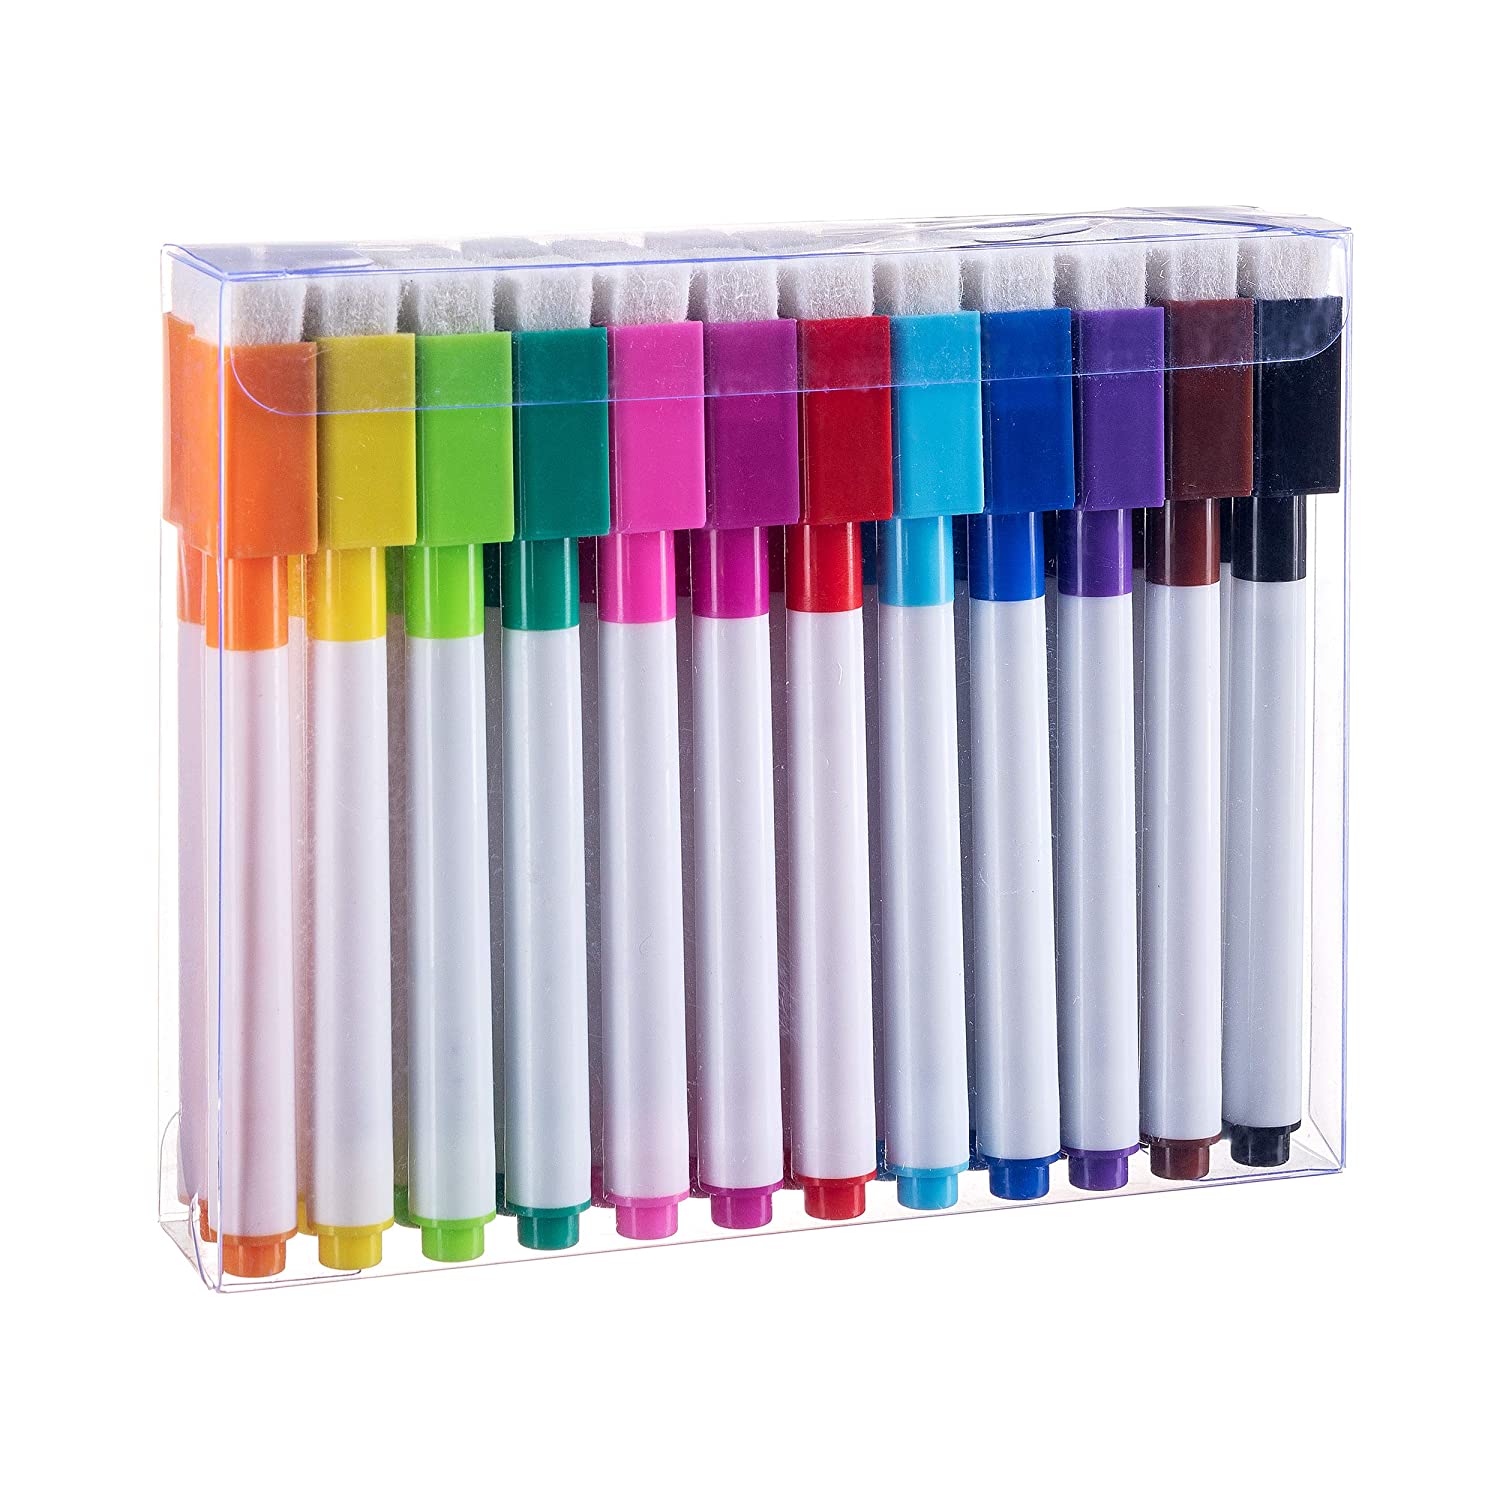 Wet & Dry Erase Markers